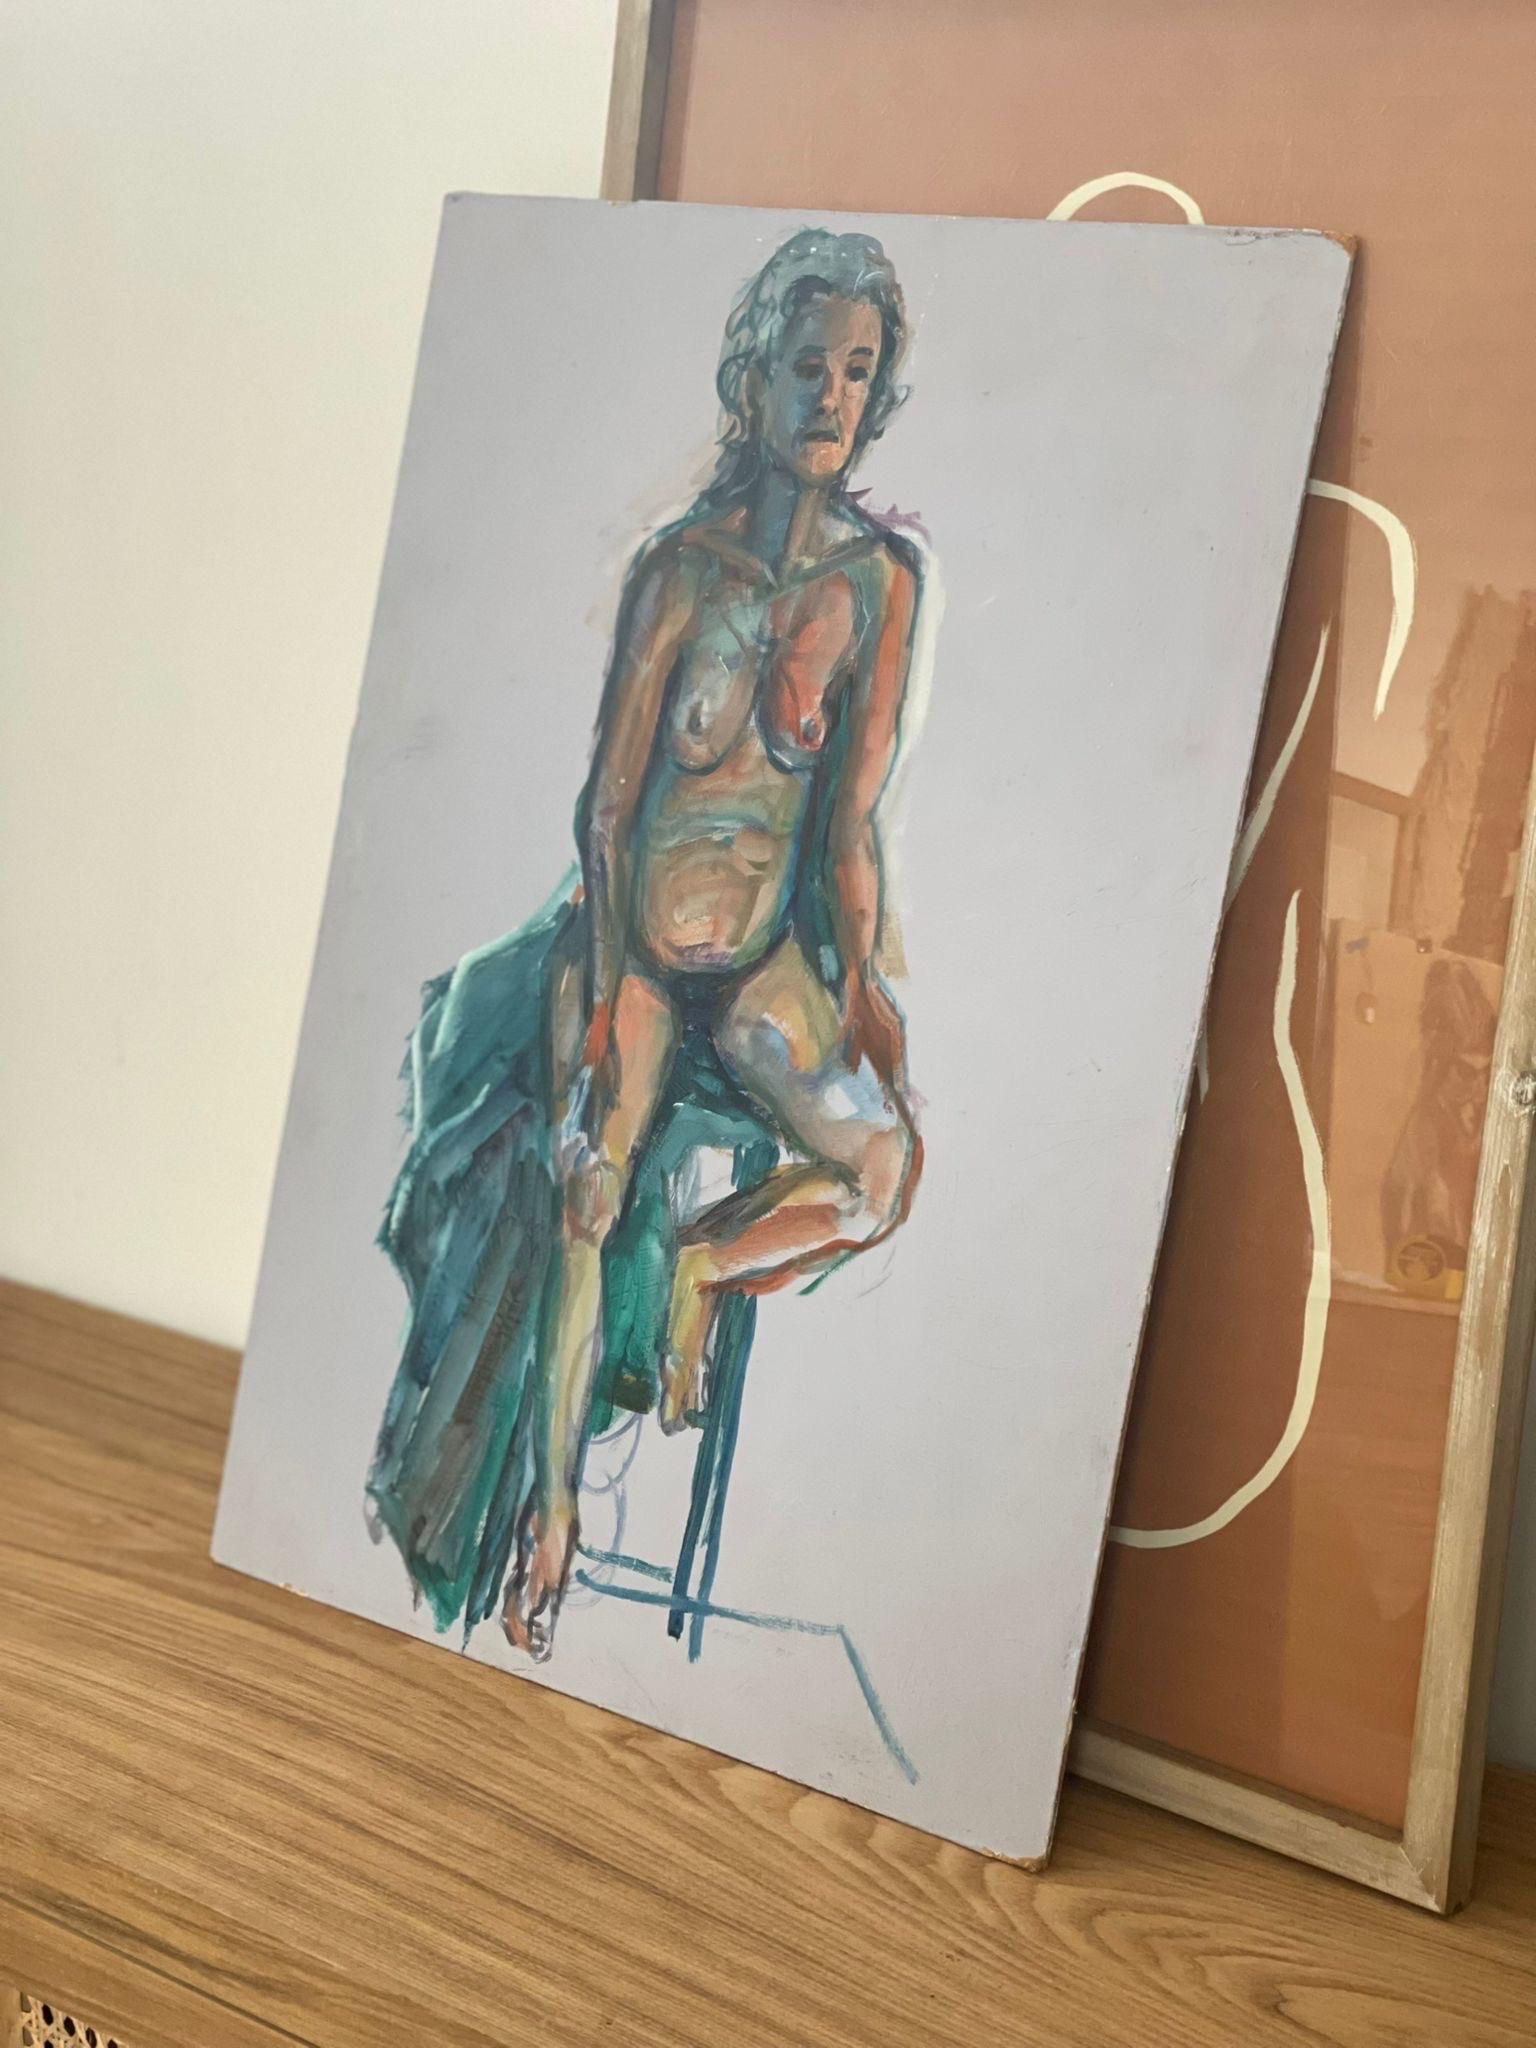 Vintage Abstract Nude Woman Figure Drawing on Board Possibly Pastel Retro broad strokes unique unsigned artwork handmade

Dimensions. 18 L ; 0,25 P ; 24 H